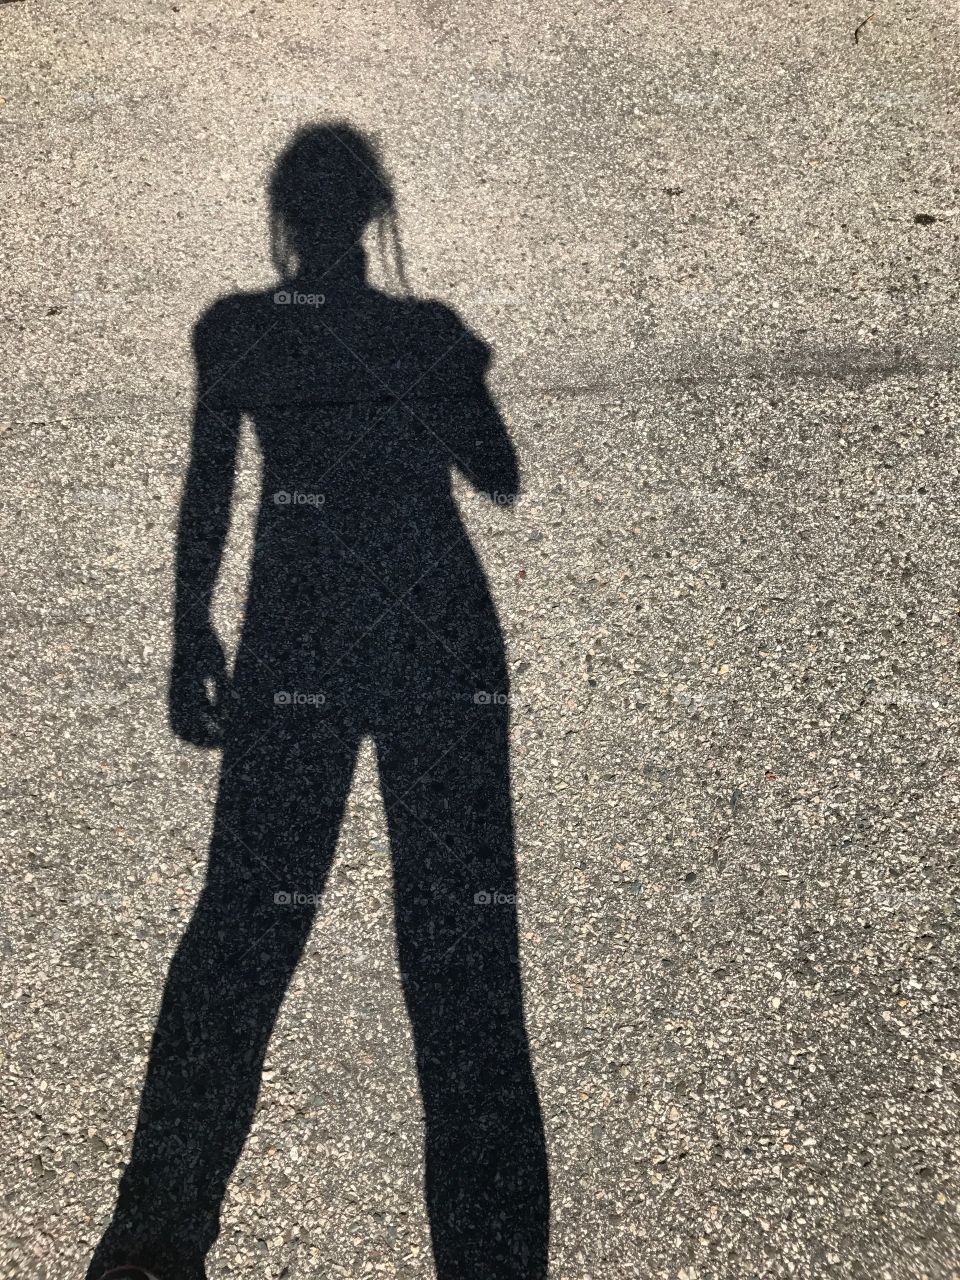 Shadow on blacktop. There’s something so sleek about this long shadow on asphalt. I couldn’t help but take the photo!